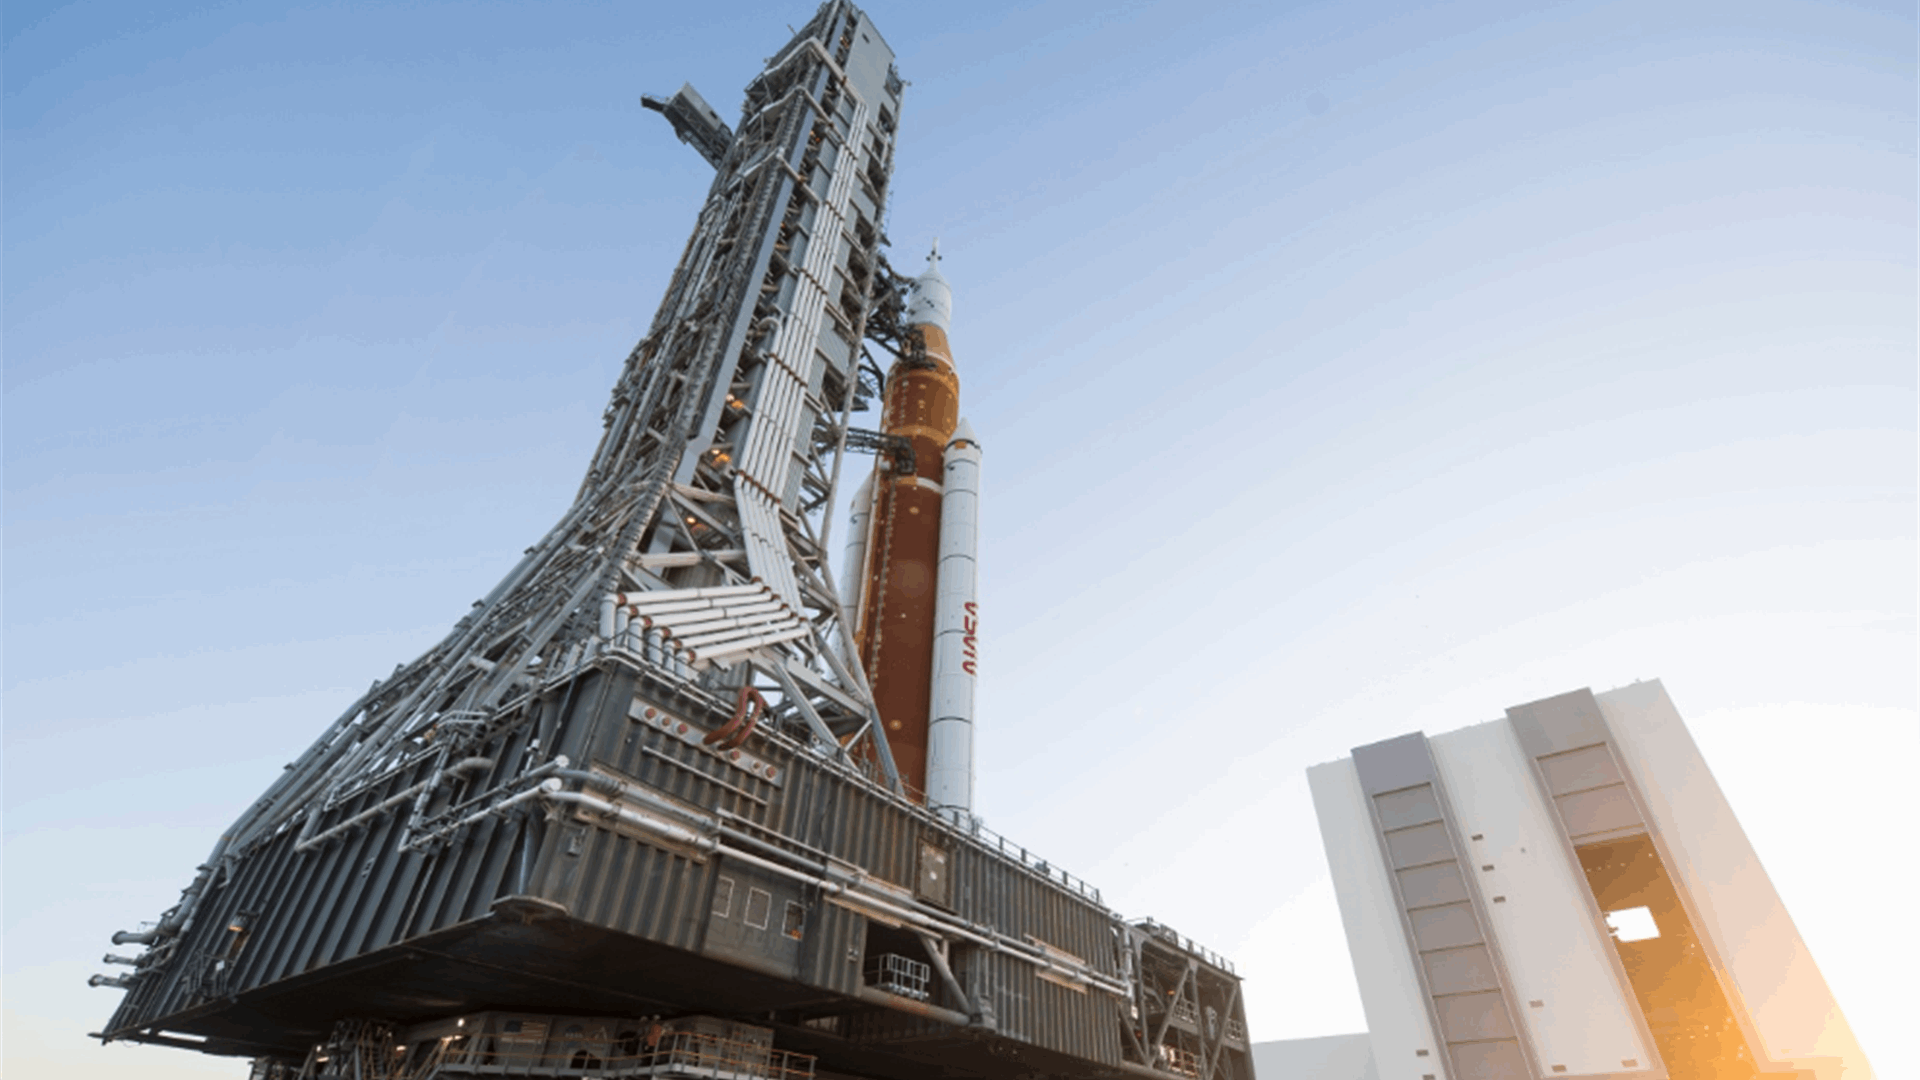 Congress prepares to continue throwing money at NASA’s Space Launch System